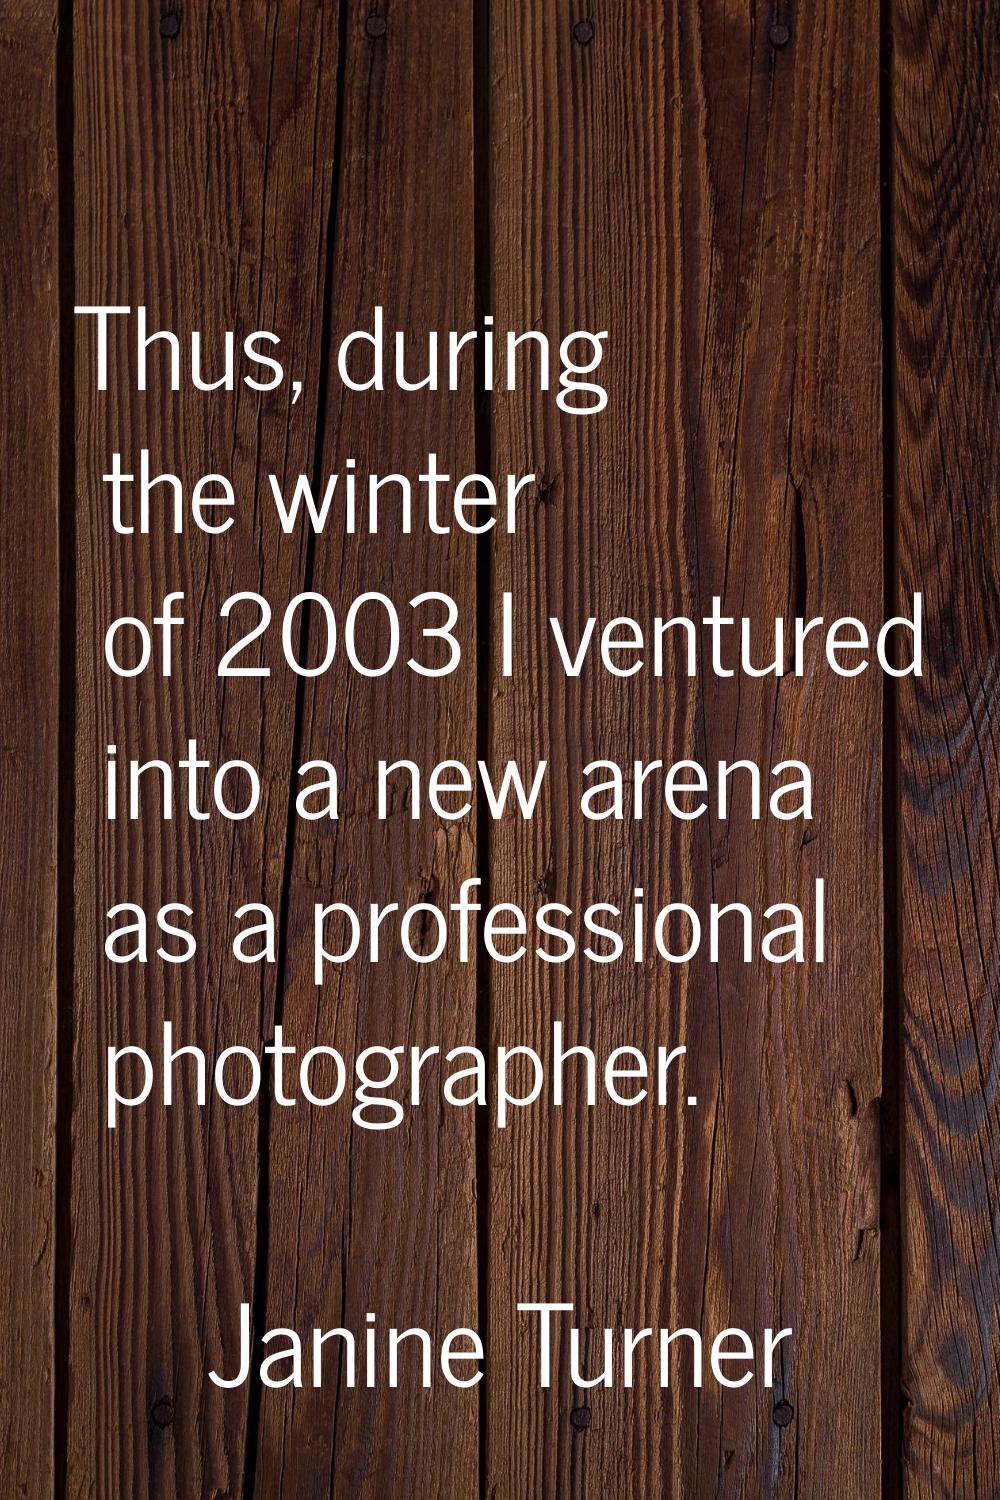 Thus, during the winter of 2003 I ventured into a new arena as a professional photographer.